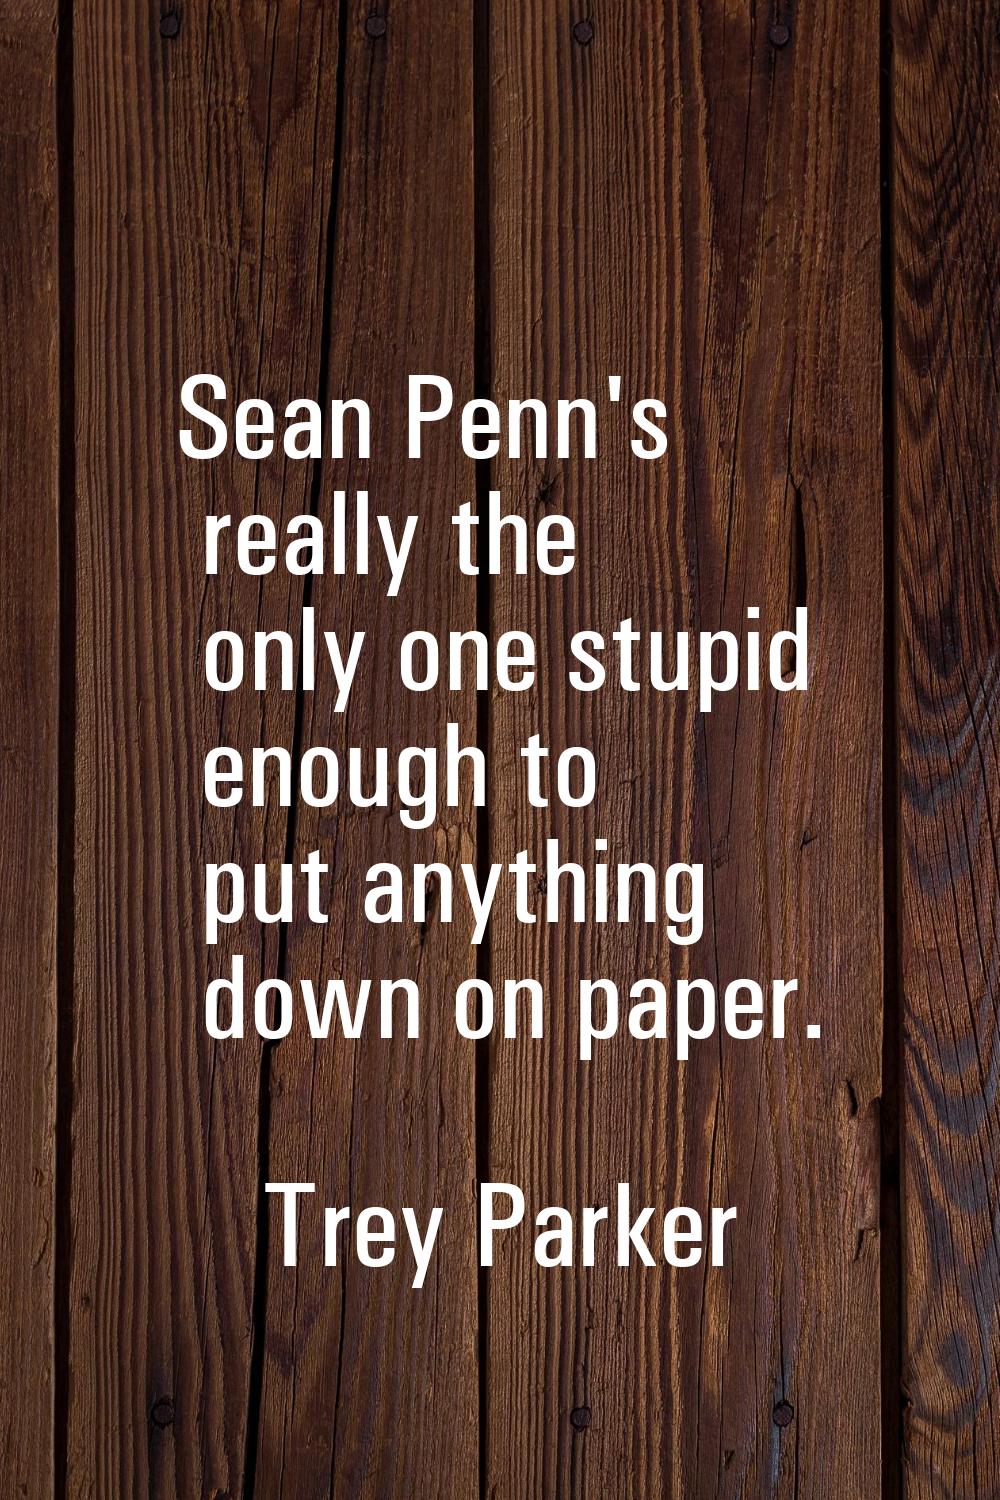 Sean Penn's really the only one stupid enough to put anything down on paper.